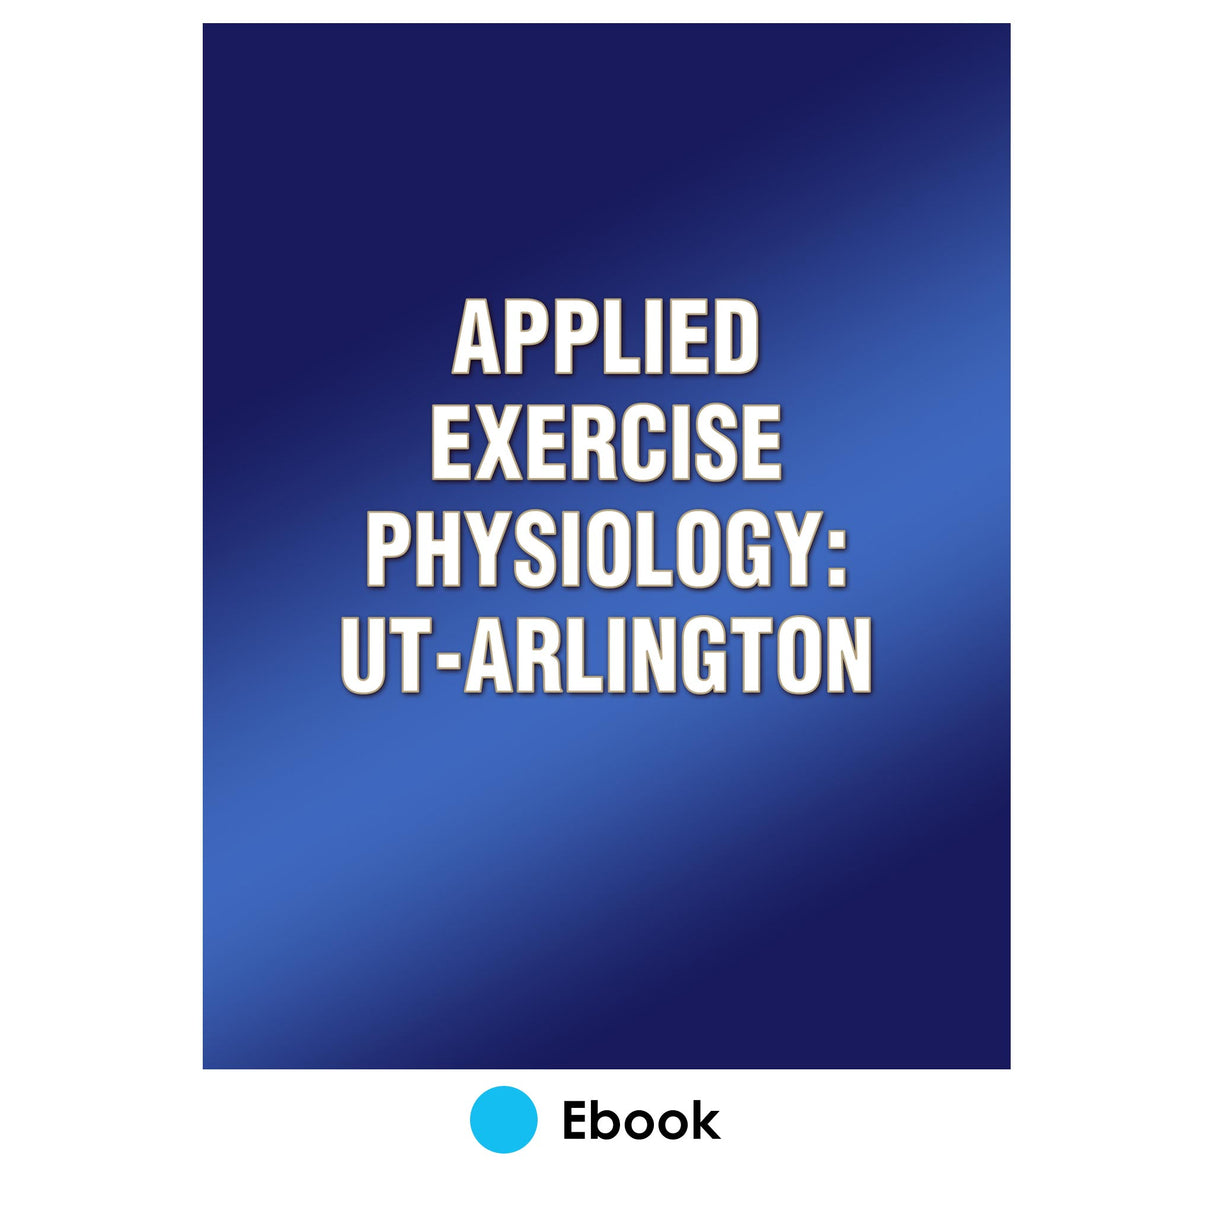 Applied Exercise Physiology 2nd Edition-UT Arlington